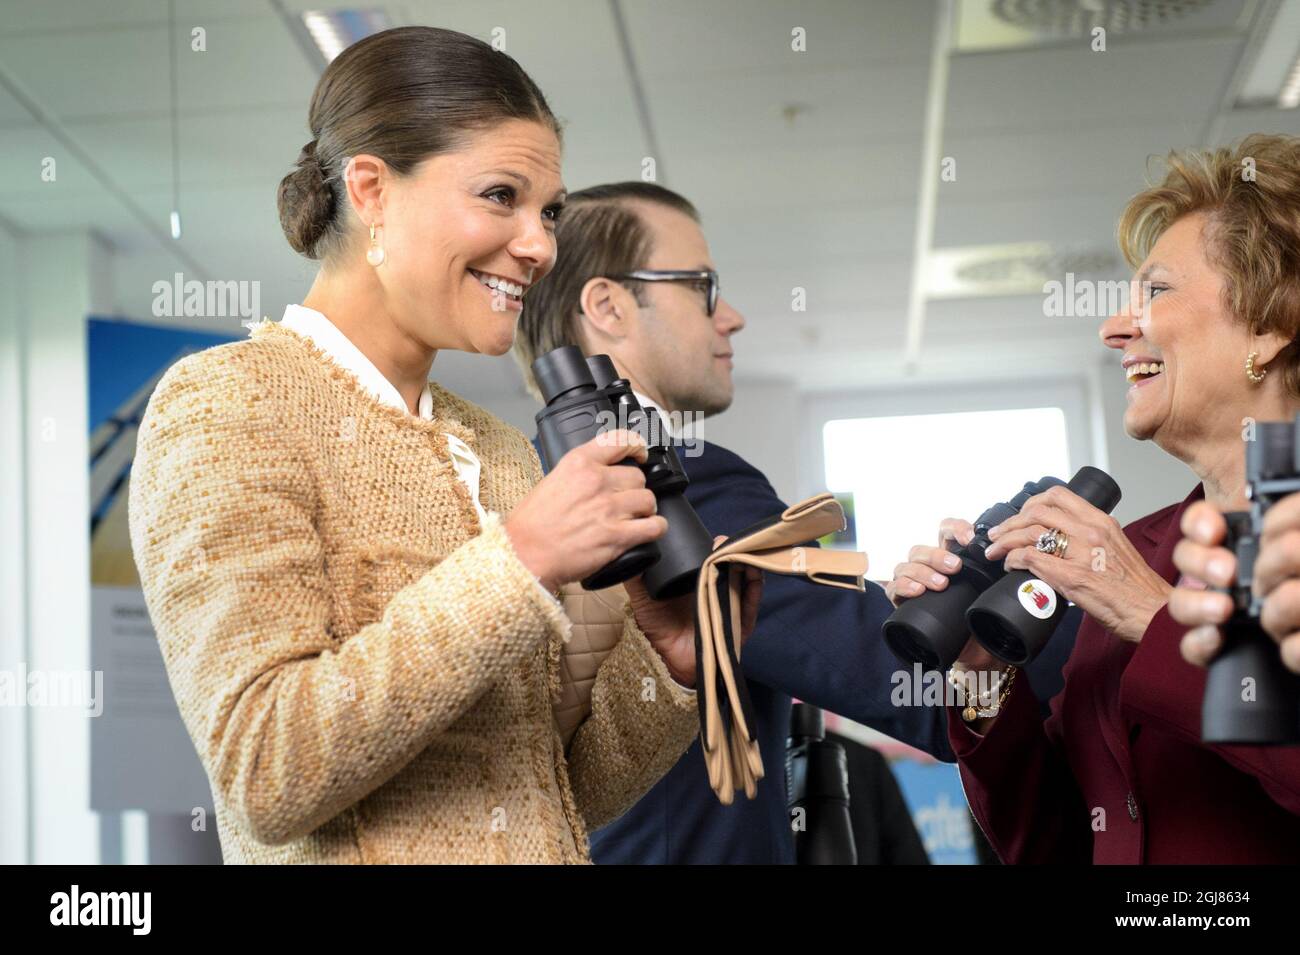 LUND 2013-10-03 Crown Princess Victoria, Prince Daniel and and Maria Cavaco Silva of Portugal are seen during a visit to Ideon Gateway in Lund, Sweden, October 3, 2013. The Crown Princess couple accompanied President Anibal Cavaco Silva and his wife Maria. The Ideon Gateway is a model for building a city part designed for research and innovation. The President of Portugal is on a State visit to Sweden. Foto: Ludvig Thunman / TT / Kod 10600  Stock Photo